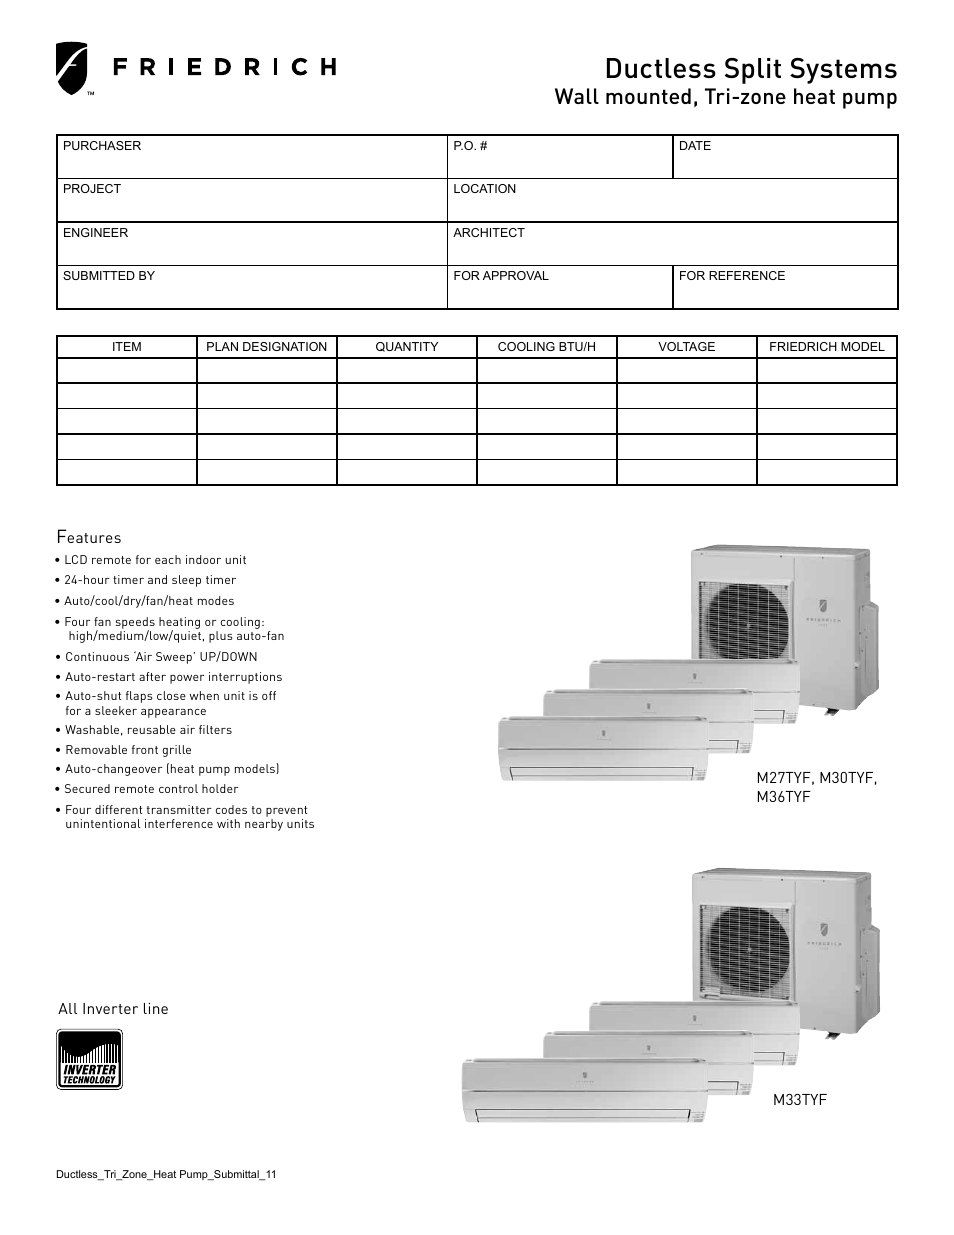 DUCTLESS SPLIT SYSTEMS M36TYF2